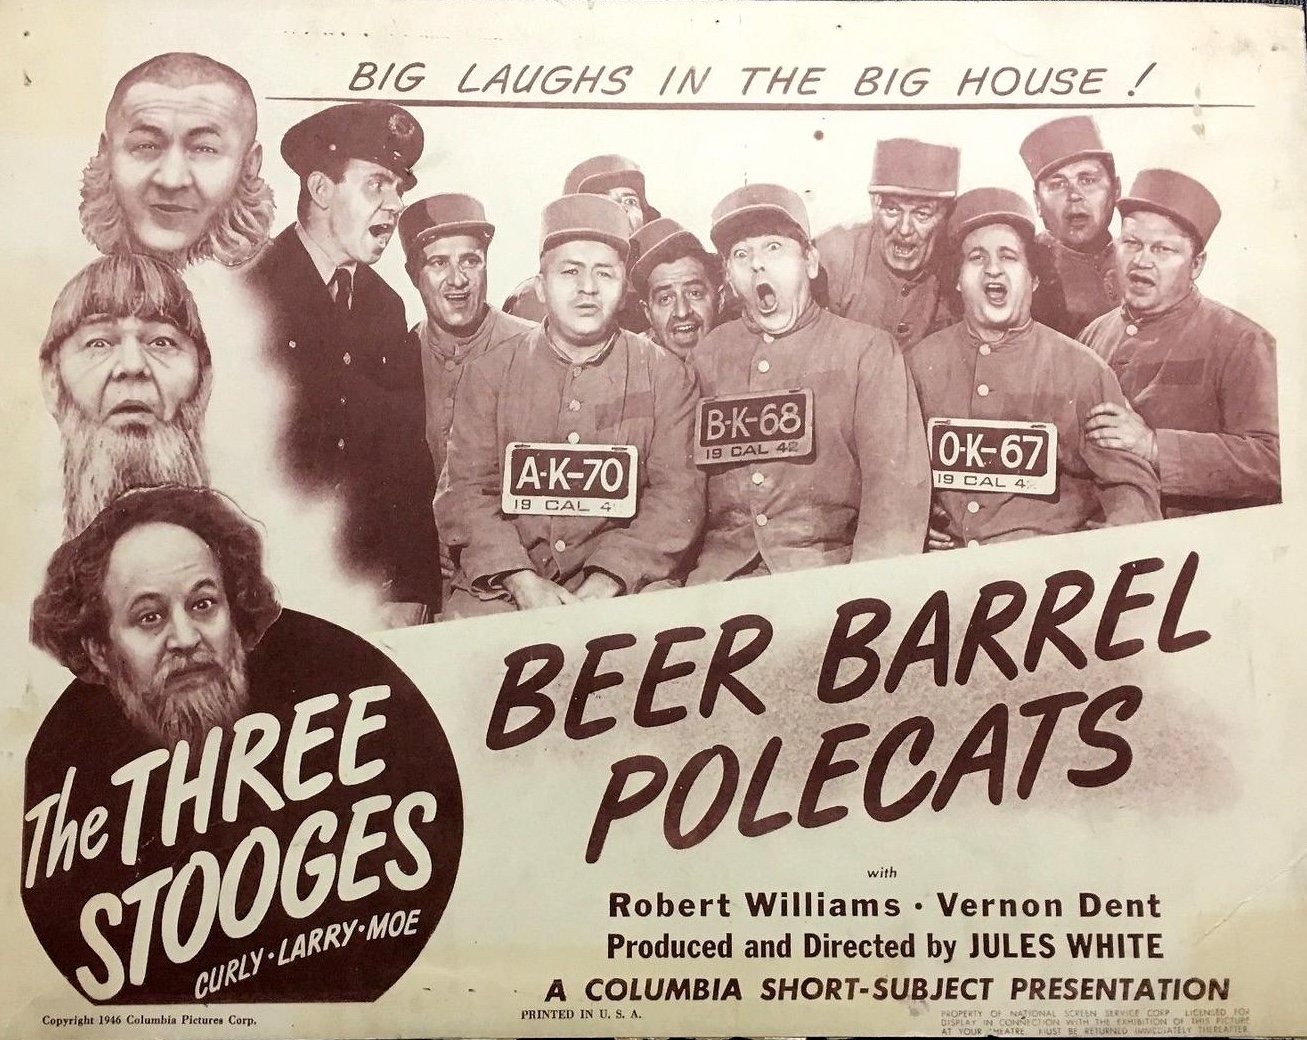 Beer Barrel Polecats movie poster - the Three Stooges (Moe, Larry, Curly) in prison garb